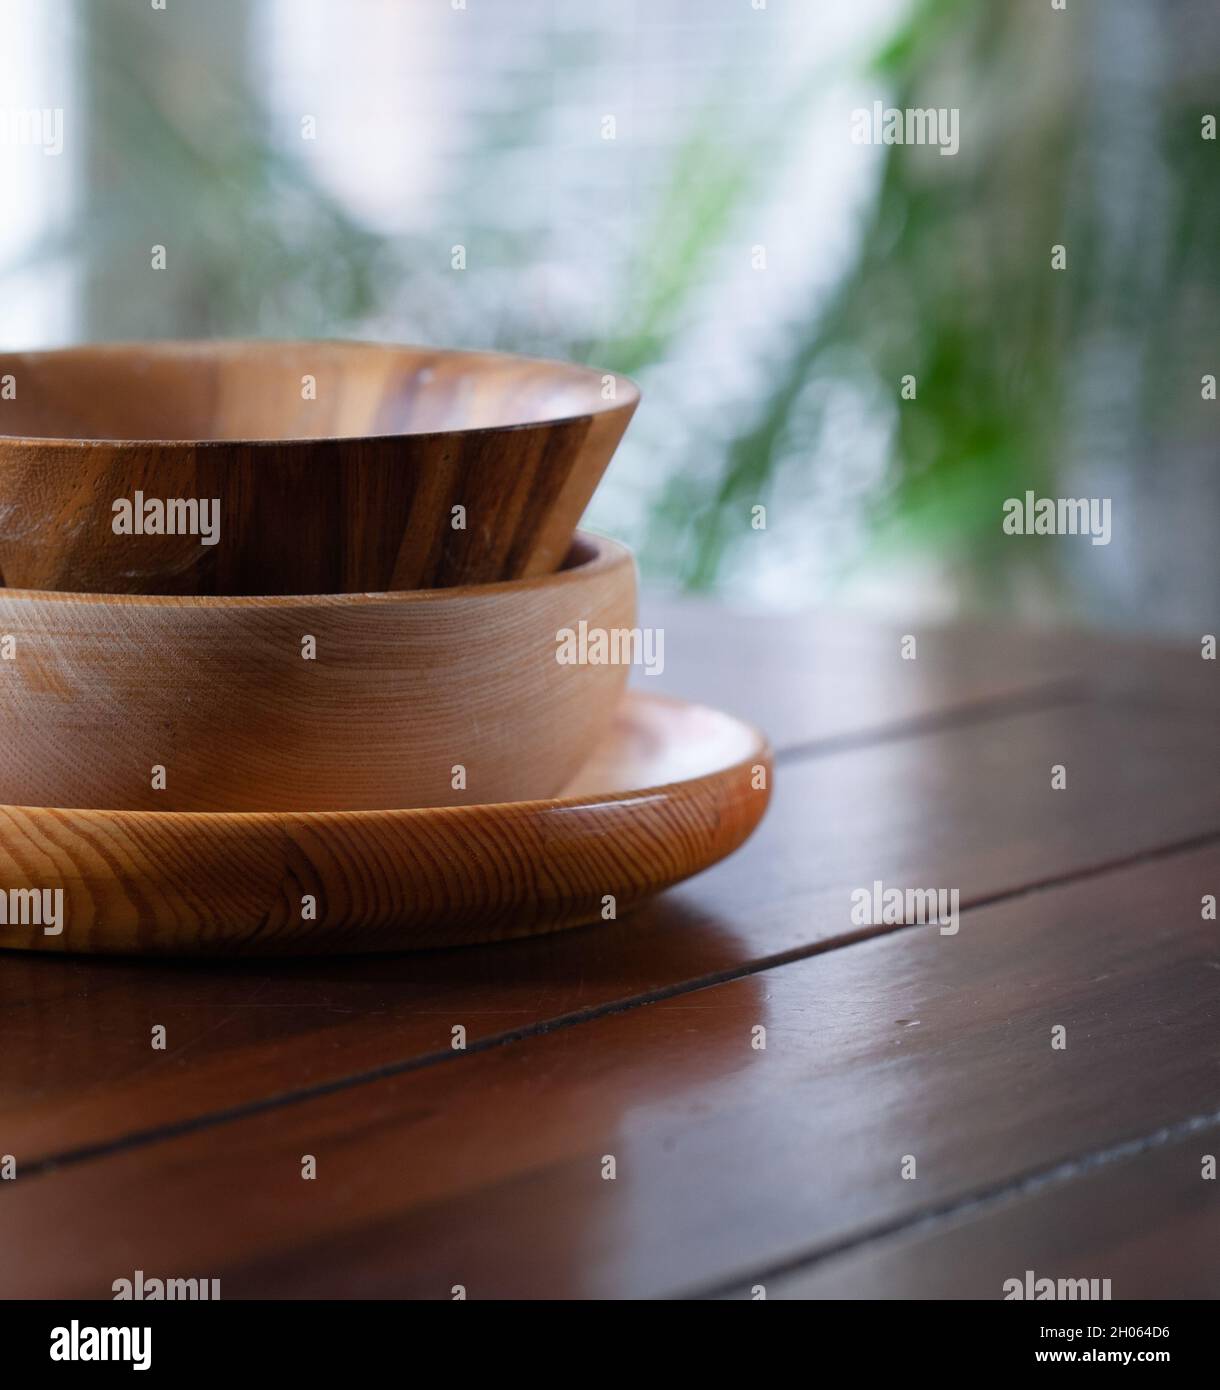 Three different kinds of wooden bowls stacked on wooden table. Stock Photo